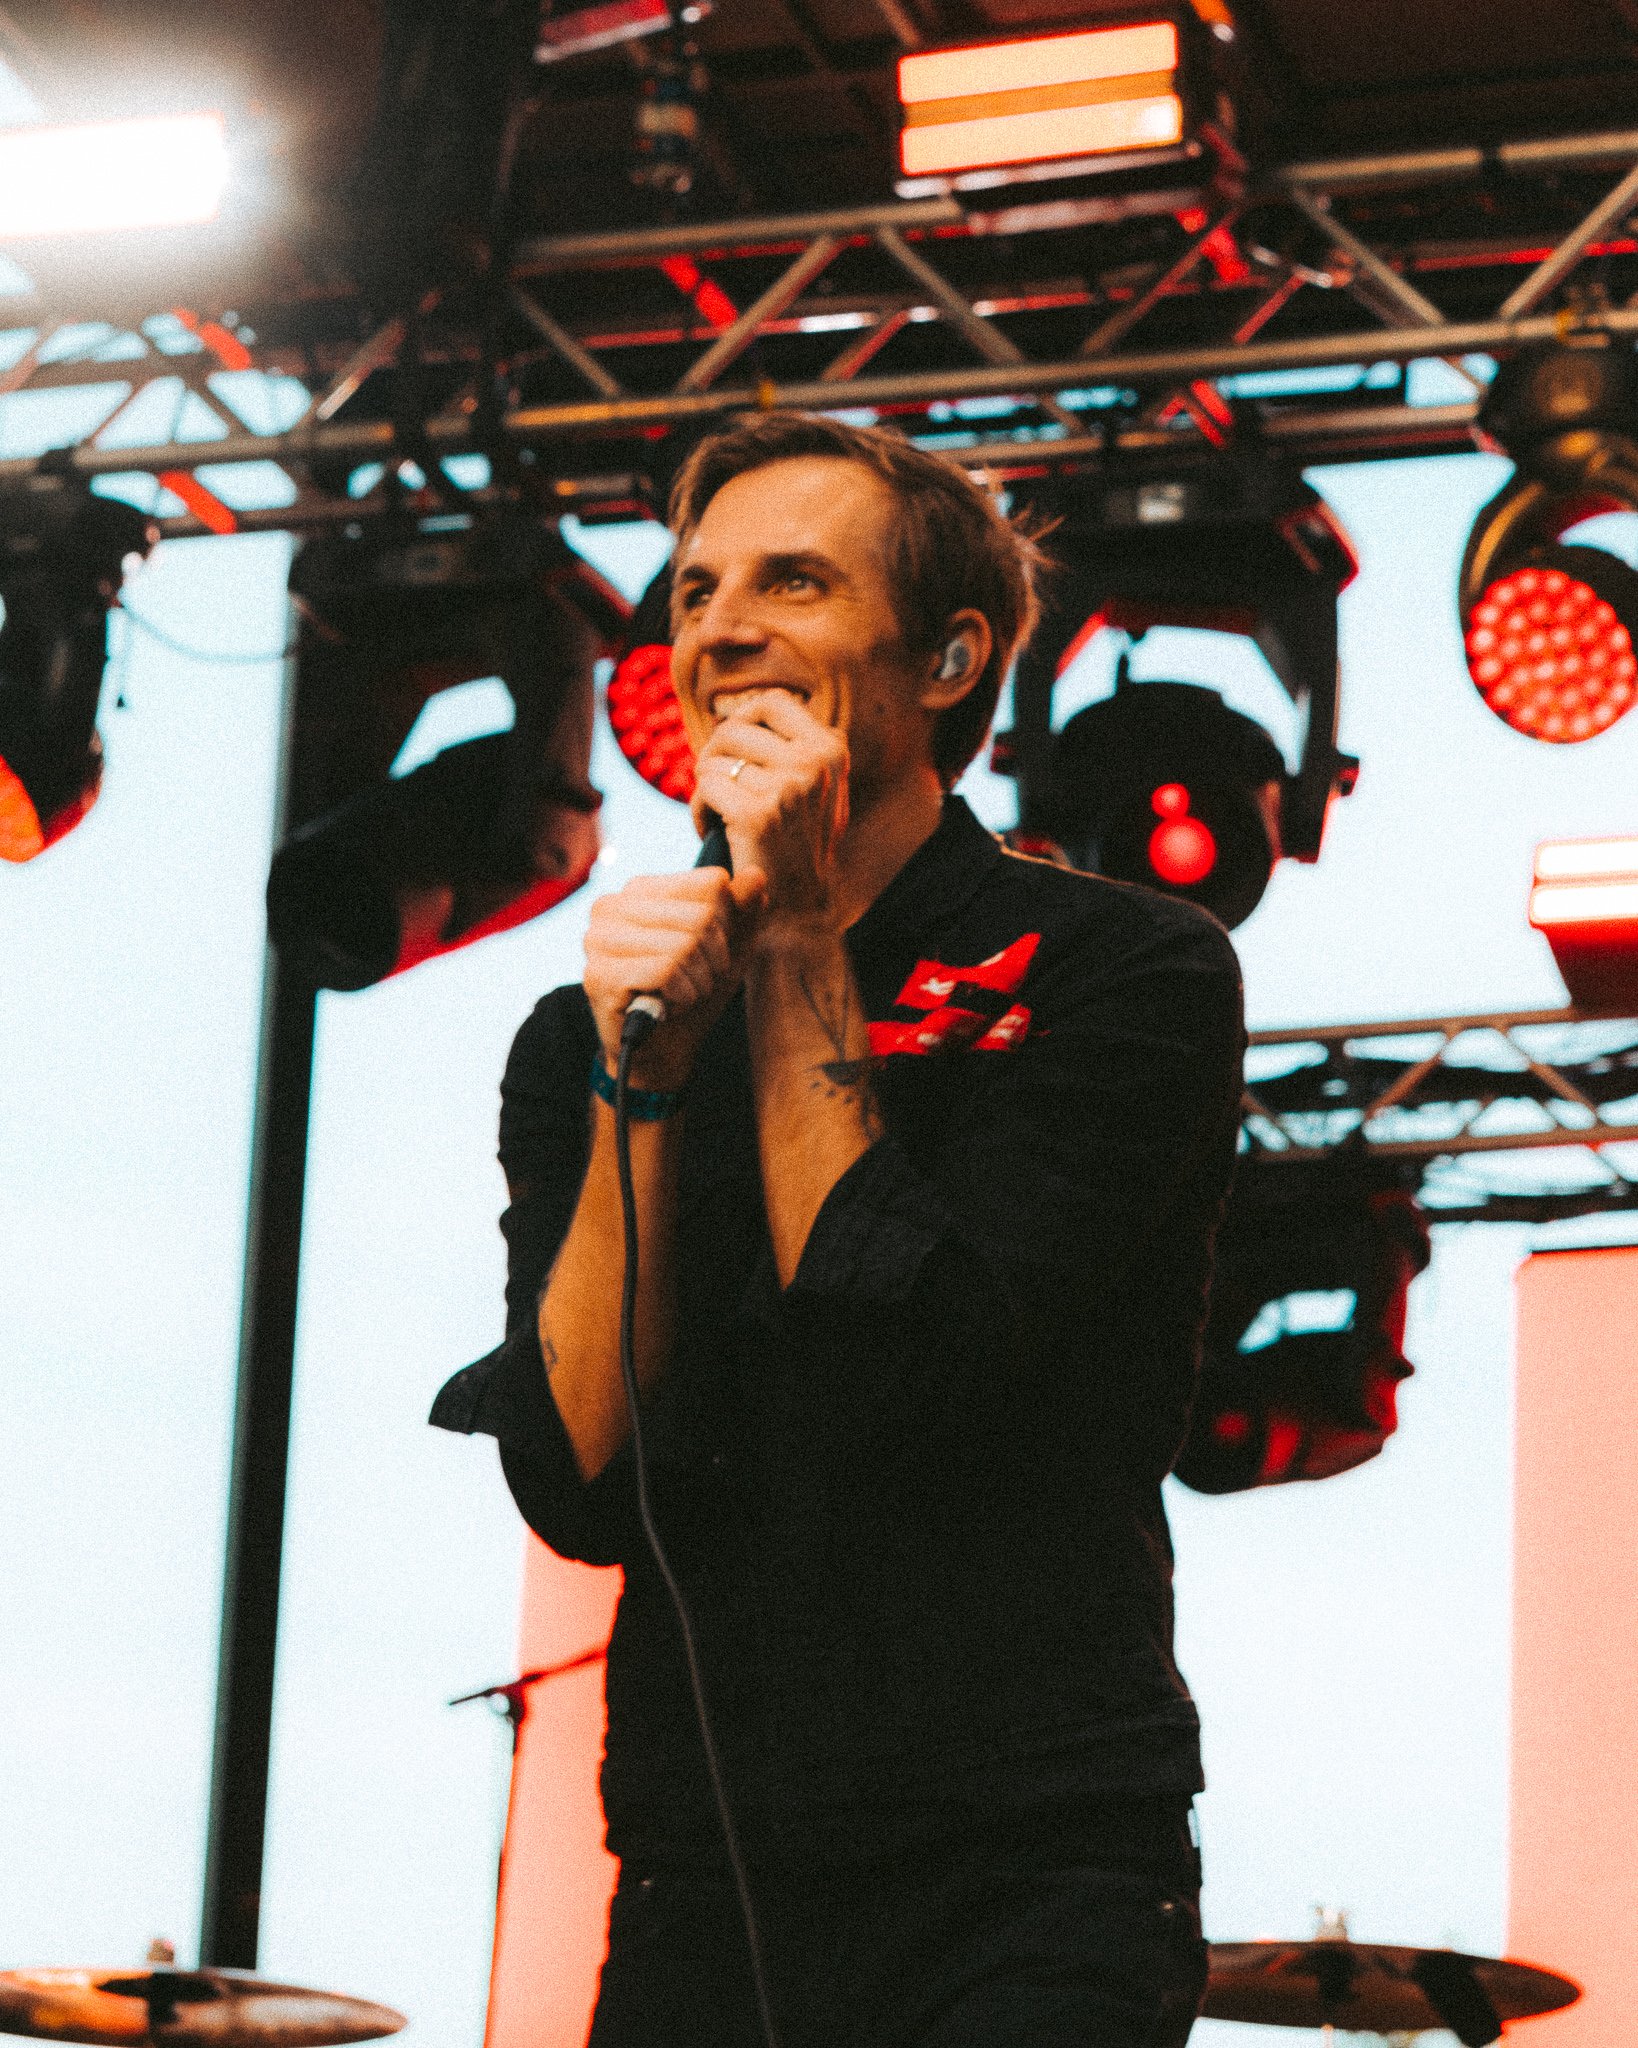  The Maine frontman John O’Callaghan takes in the festival at sunset. 